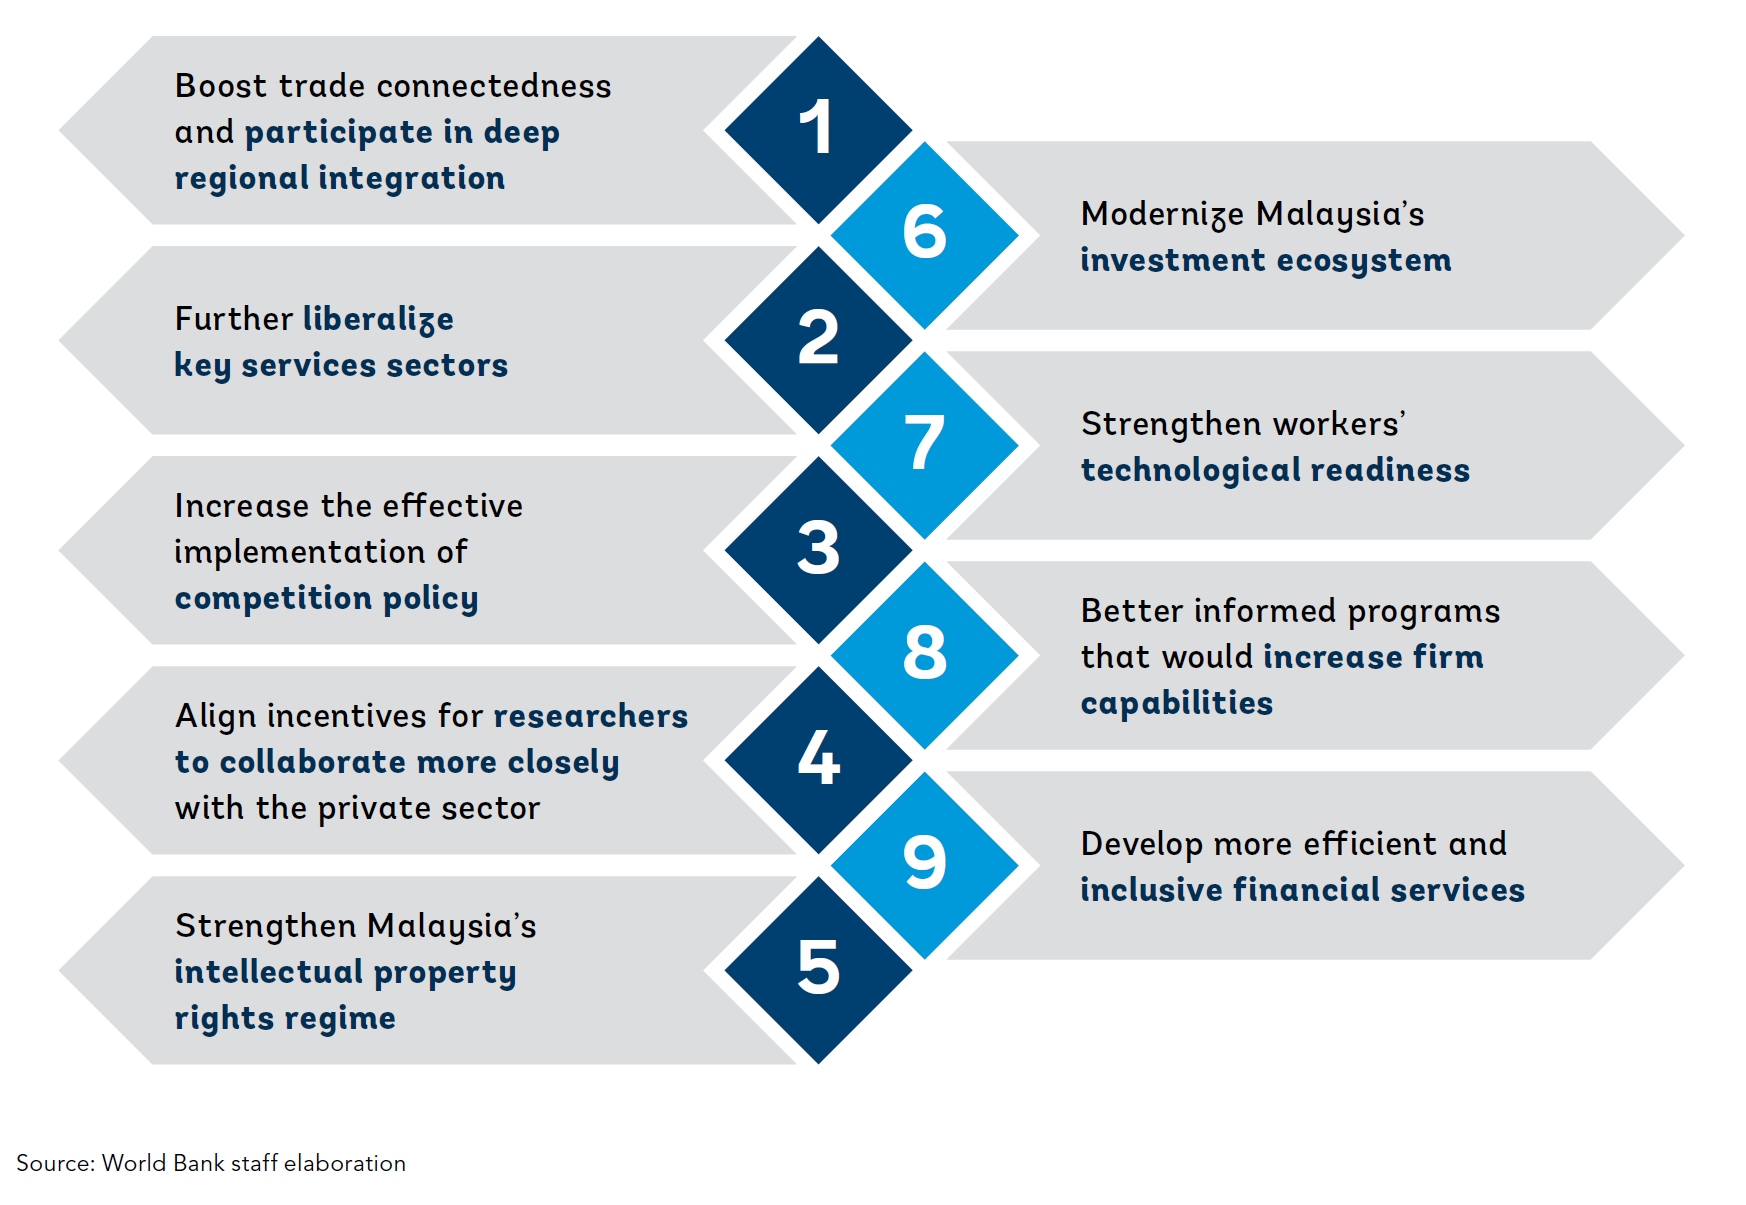 The diagram lays out some of the recommended policy measure to strengthen these pillars. It is time for Malaysia to aim high.